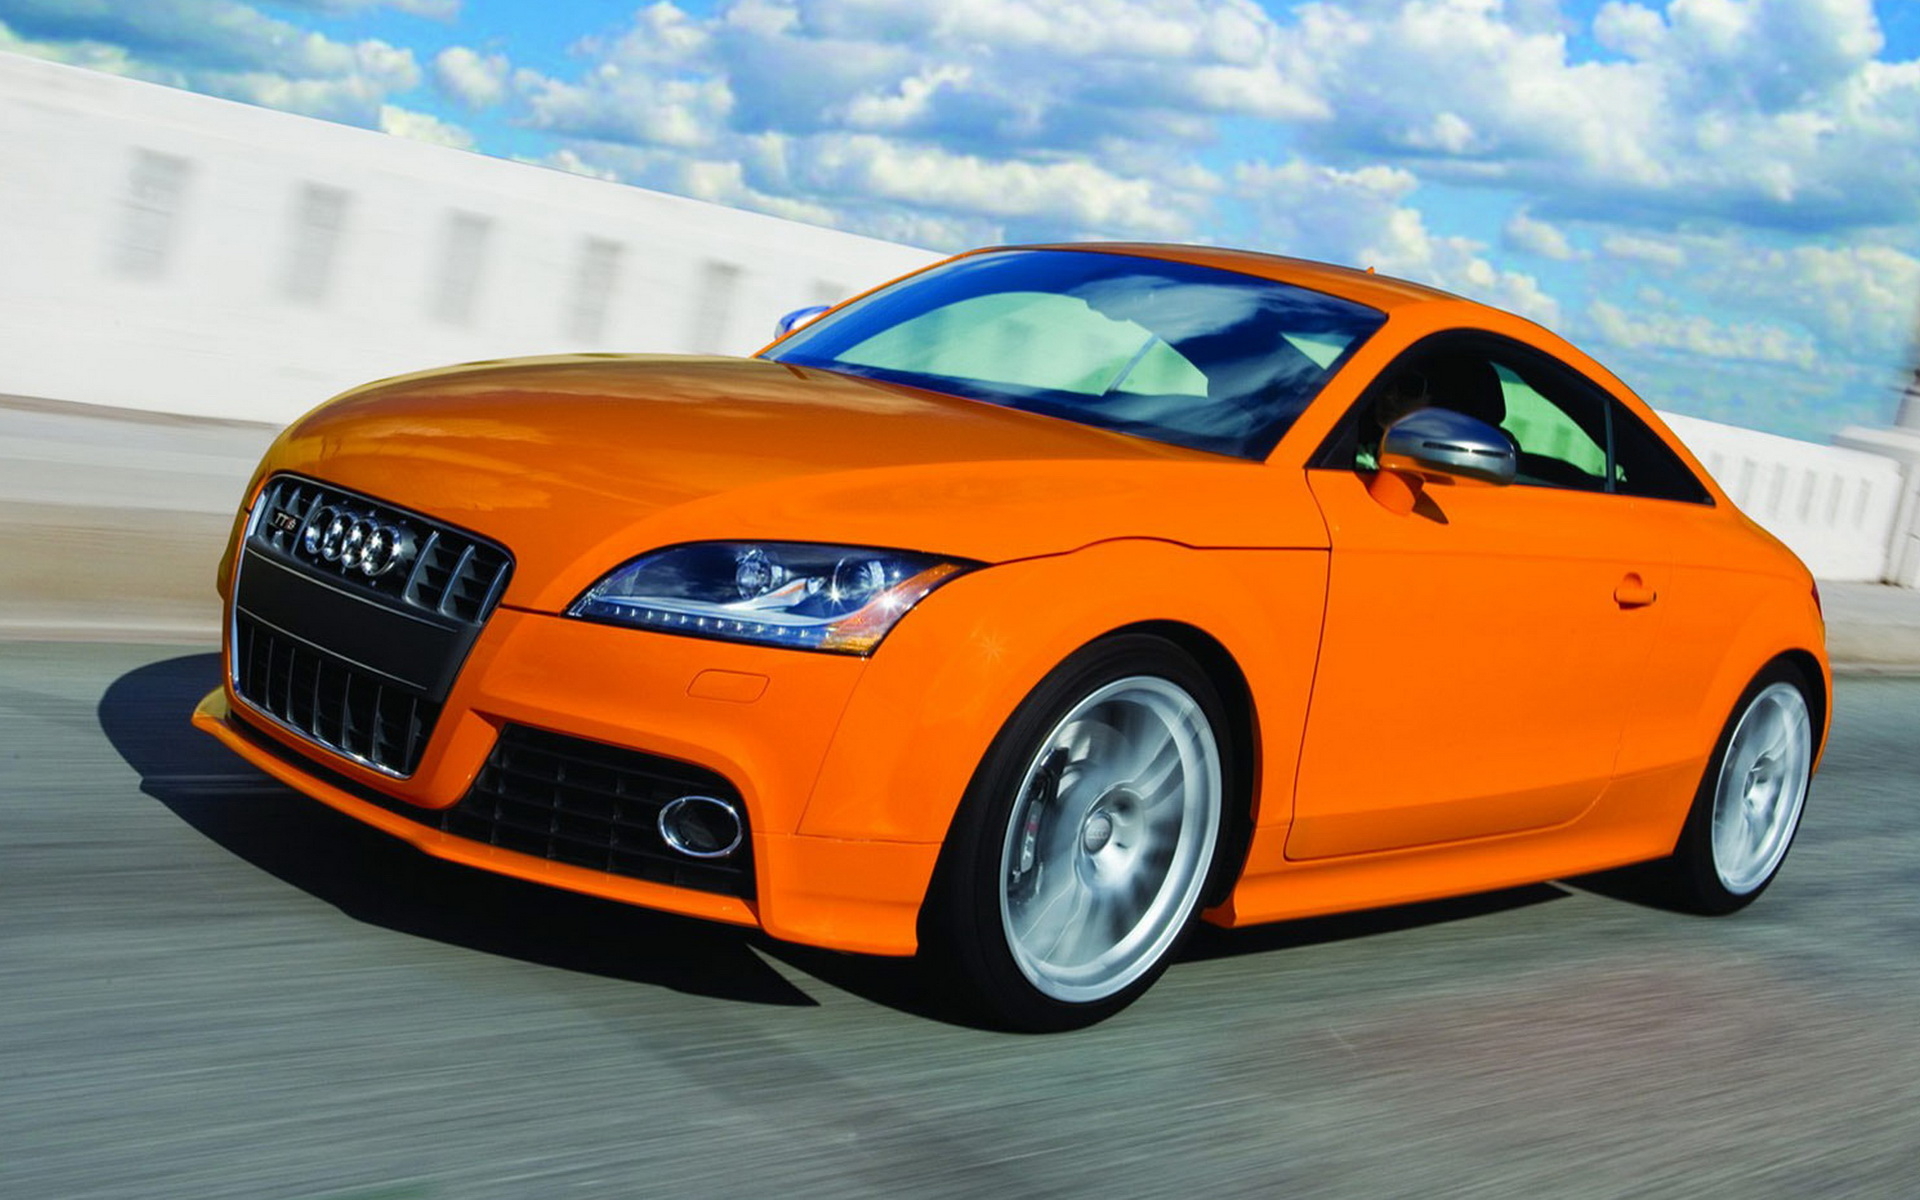 Audi TT-S orange wallpapers and images - wallpapers, pictures, photos